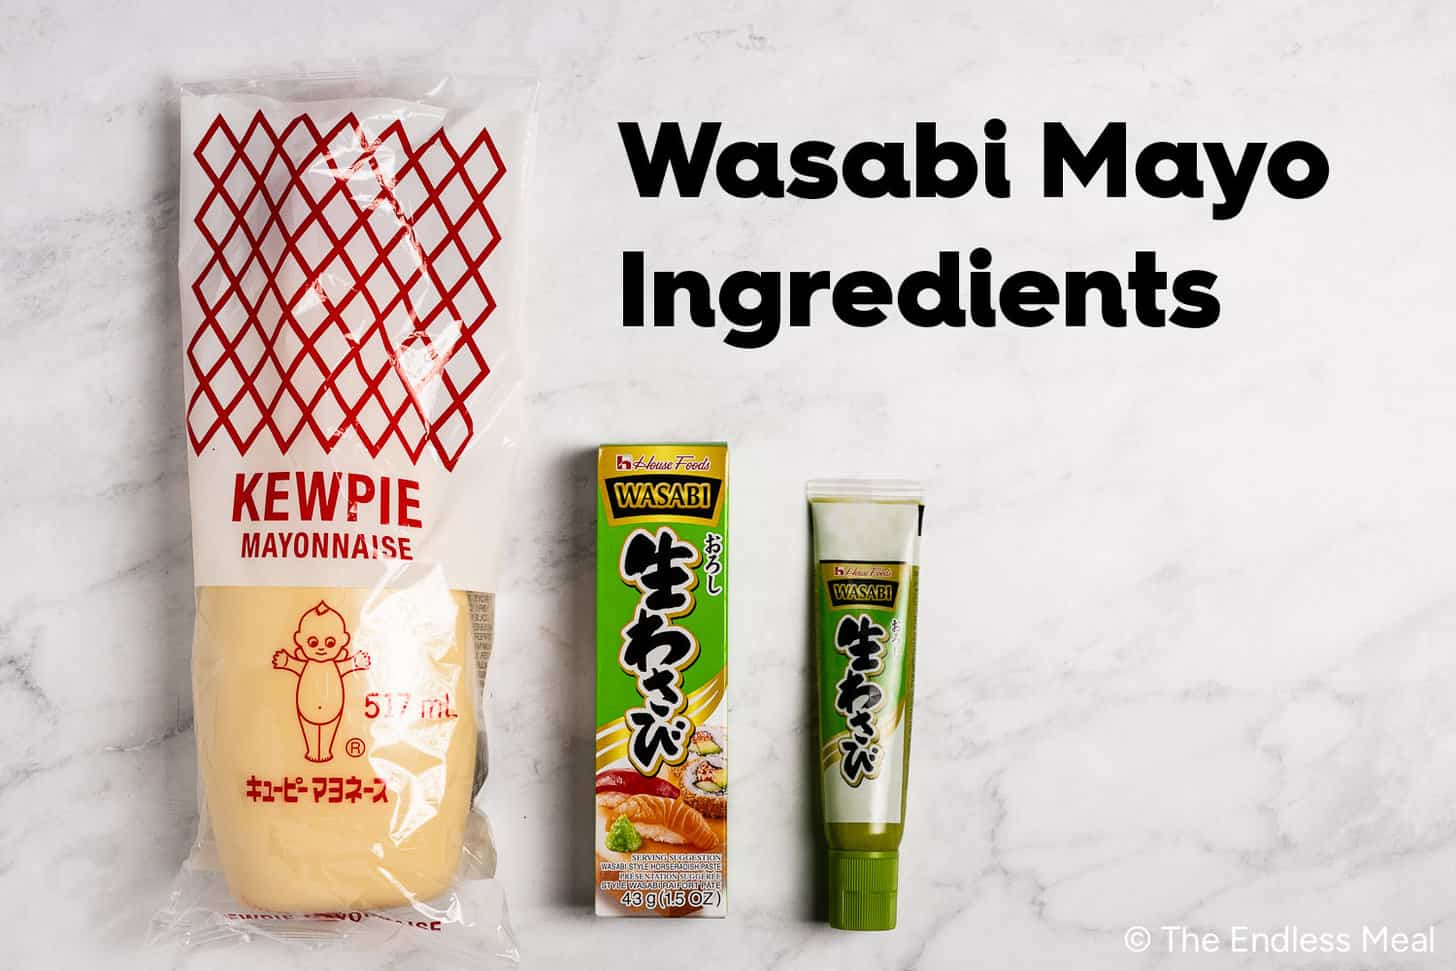 The ingredients needed to make wasabi mayo